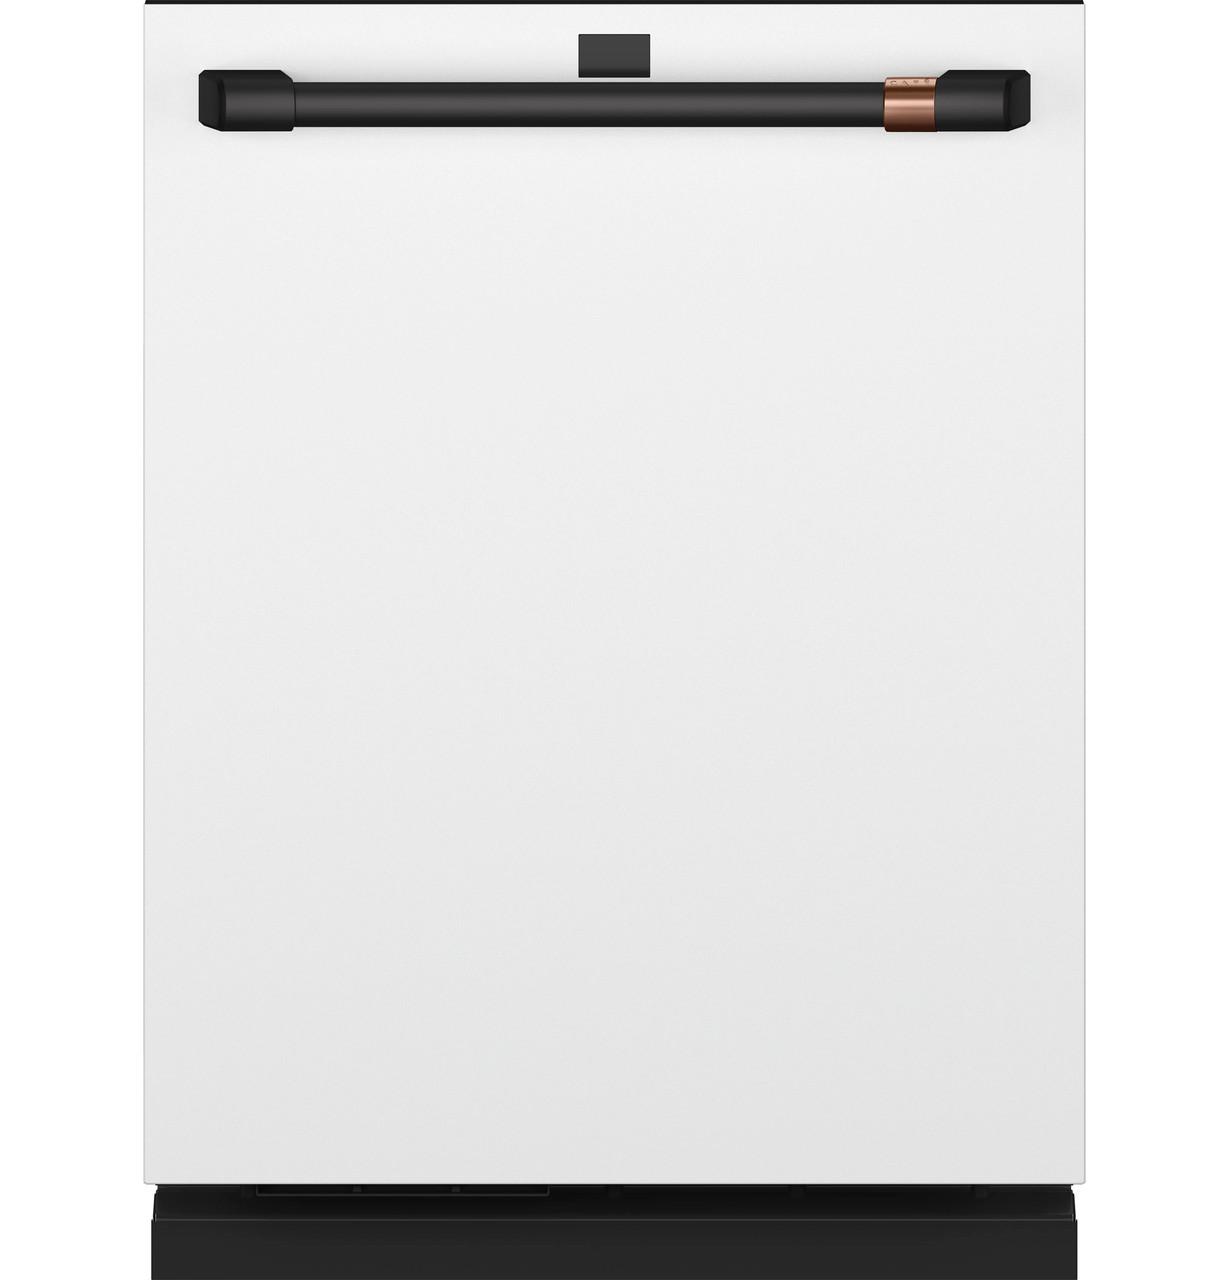 Cafe Caf(eback)™ ENERGY STAR® Smart Stainless Steel Interior Dishwasher with Sanitize and Ultra Wash